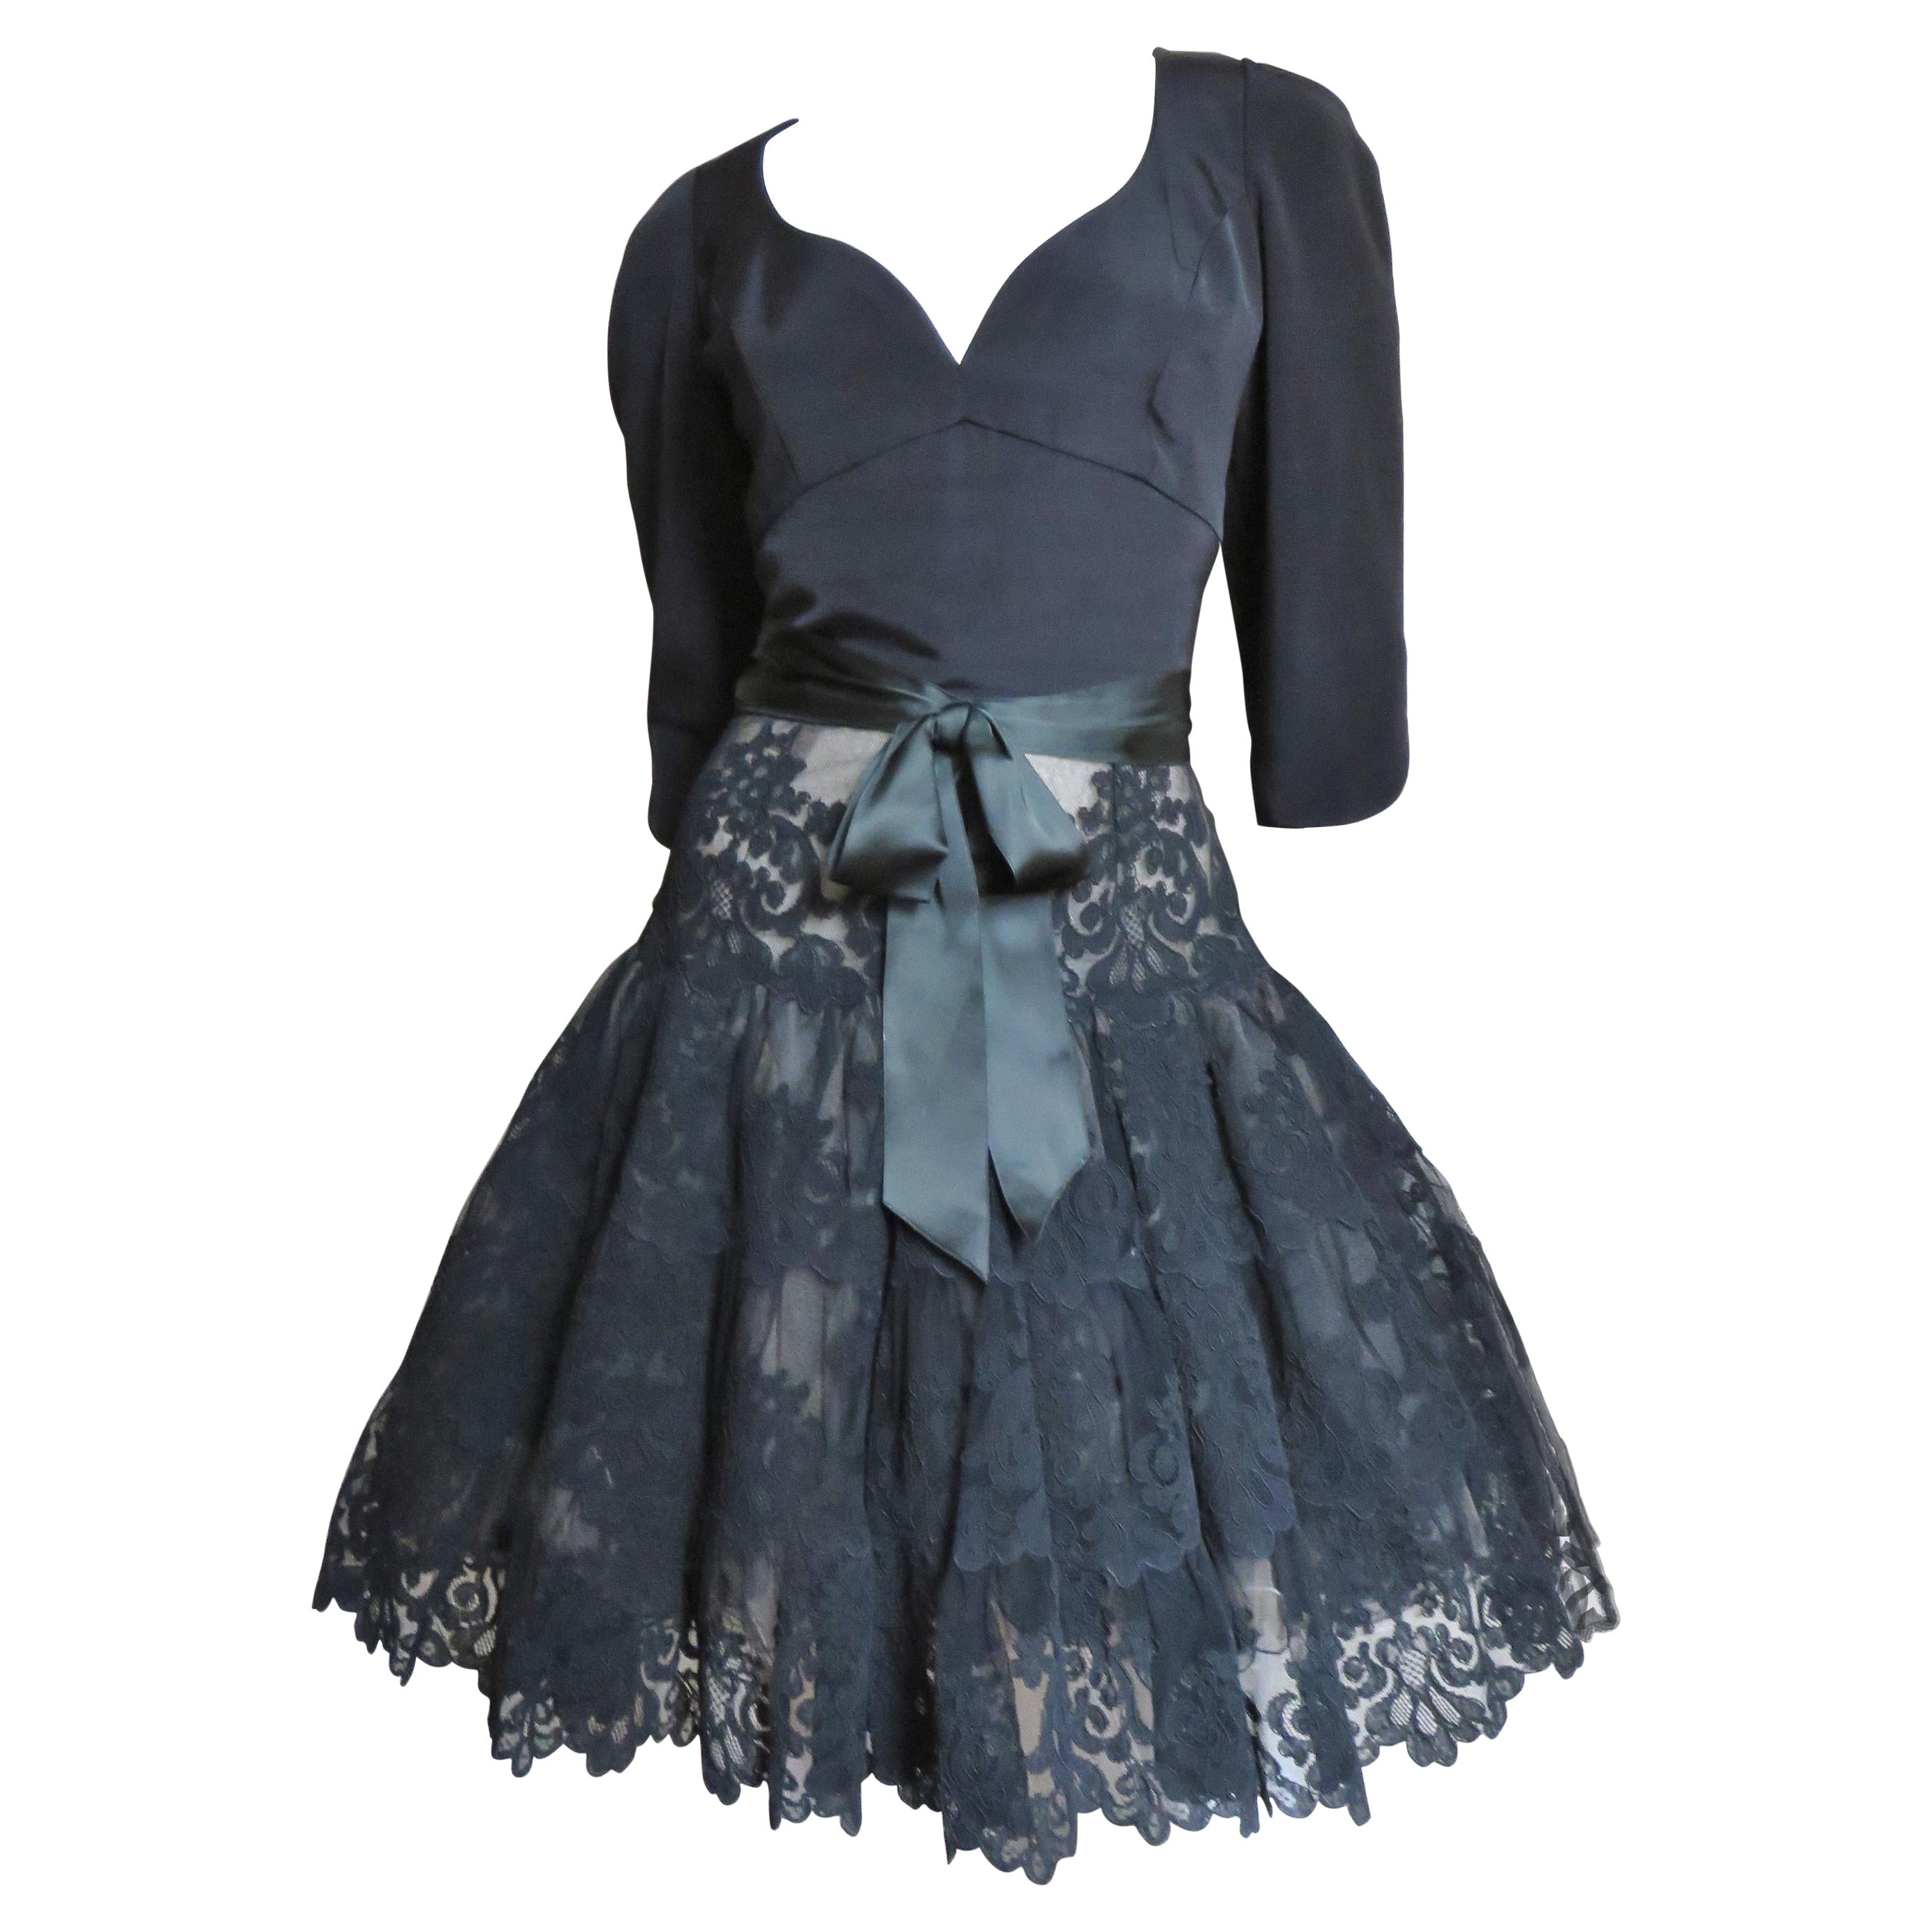 Vicky Tiel Couture Silk and Lace Full Skirt Dress